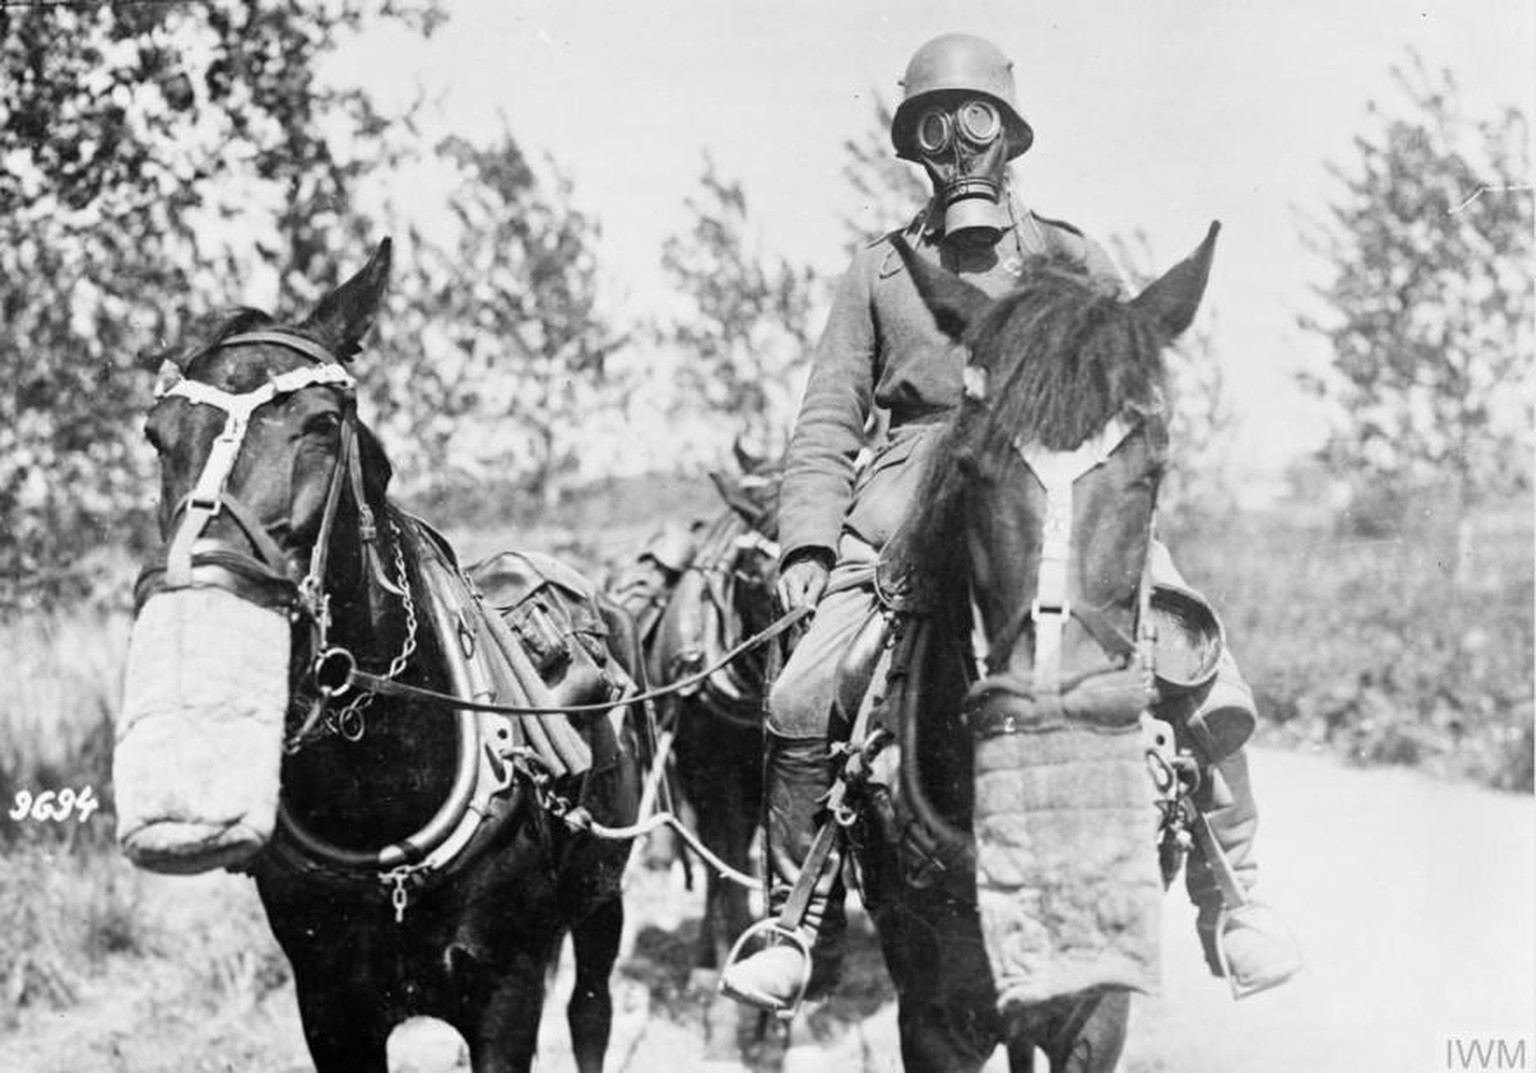 German transport driver and horses wearing gas masks on the Western Front, 1917.
https://www.iwm.org.uk/collections/item/object/205214012